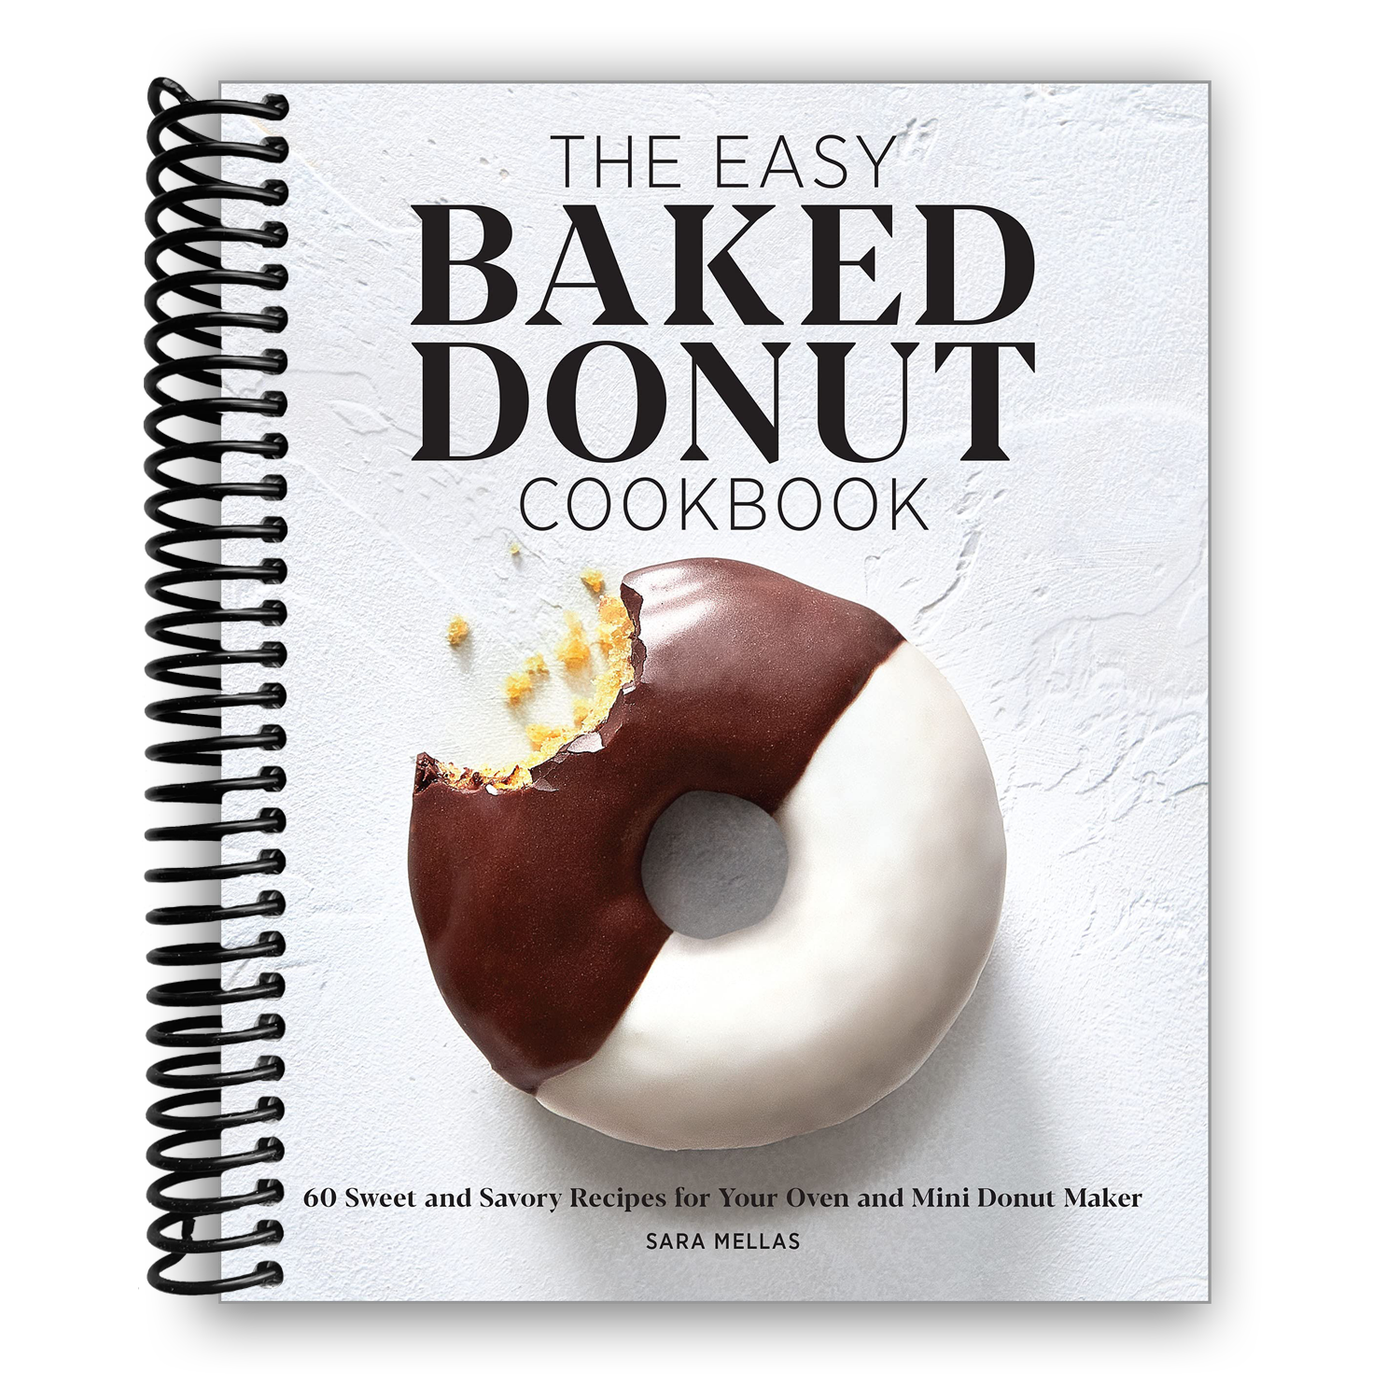 The Easy Baked Donut Cookbook: 60 Sweet and Savory Recipes for Your Oven and Mini Donut Maker (Spiral Bound)